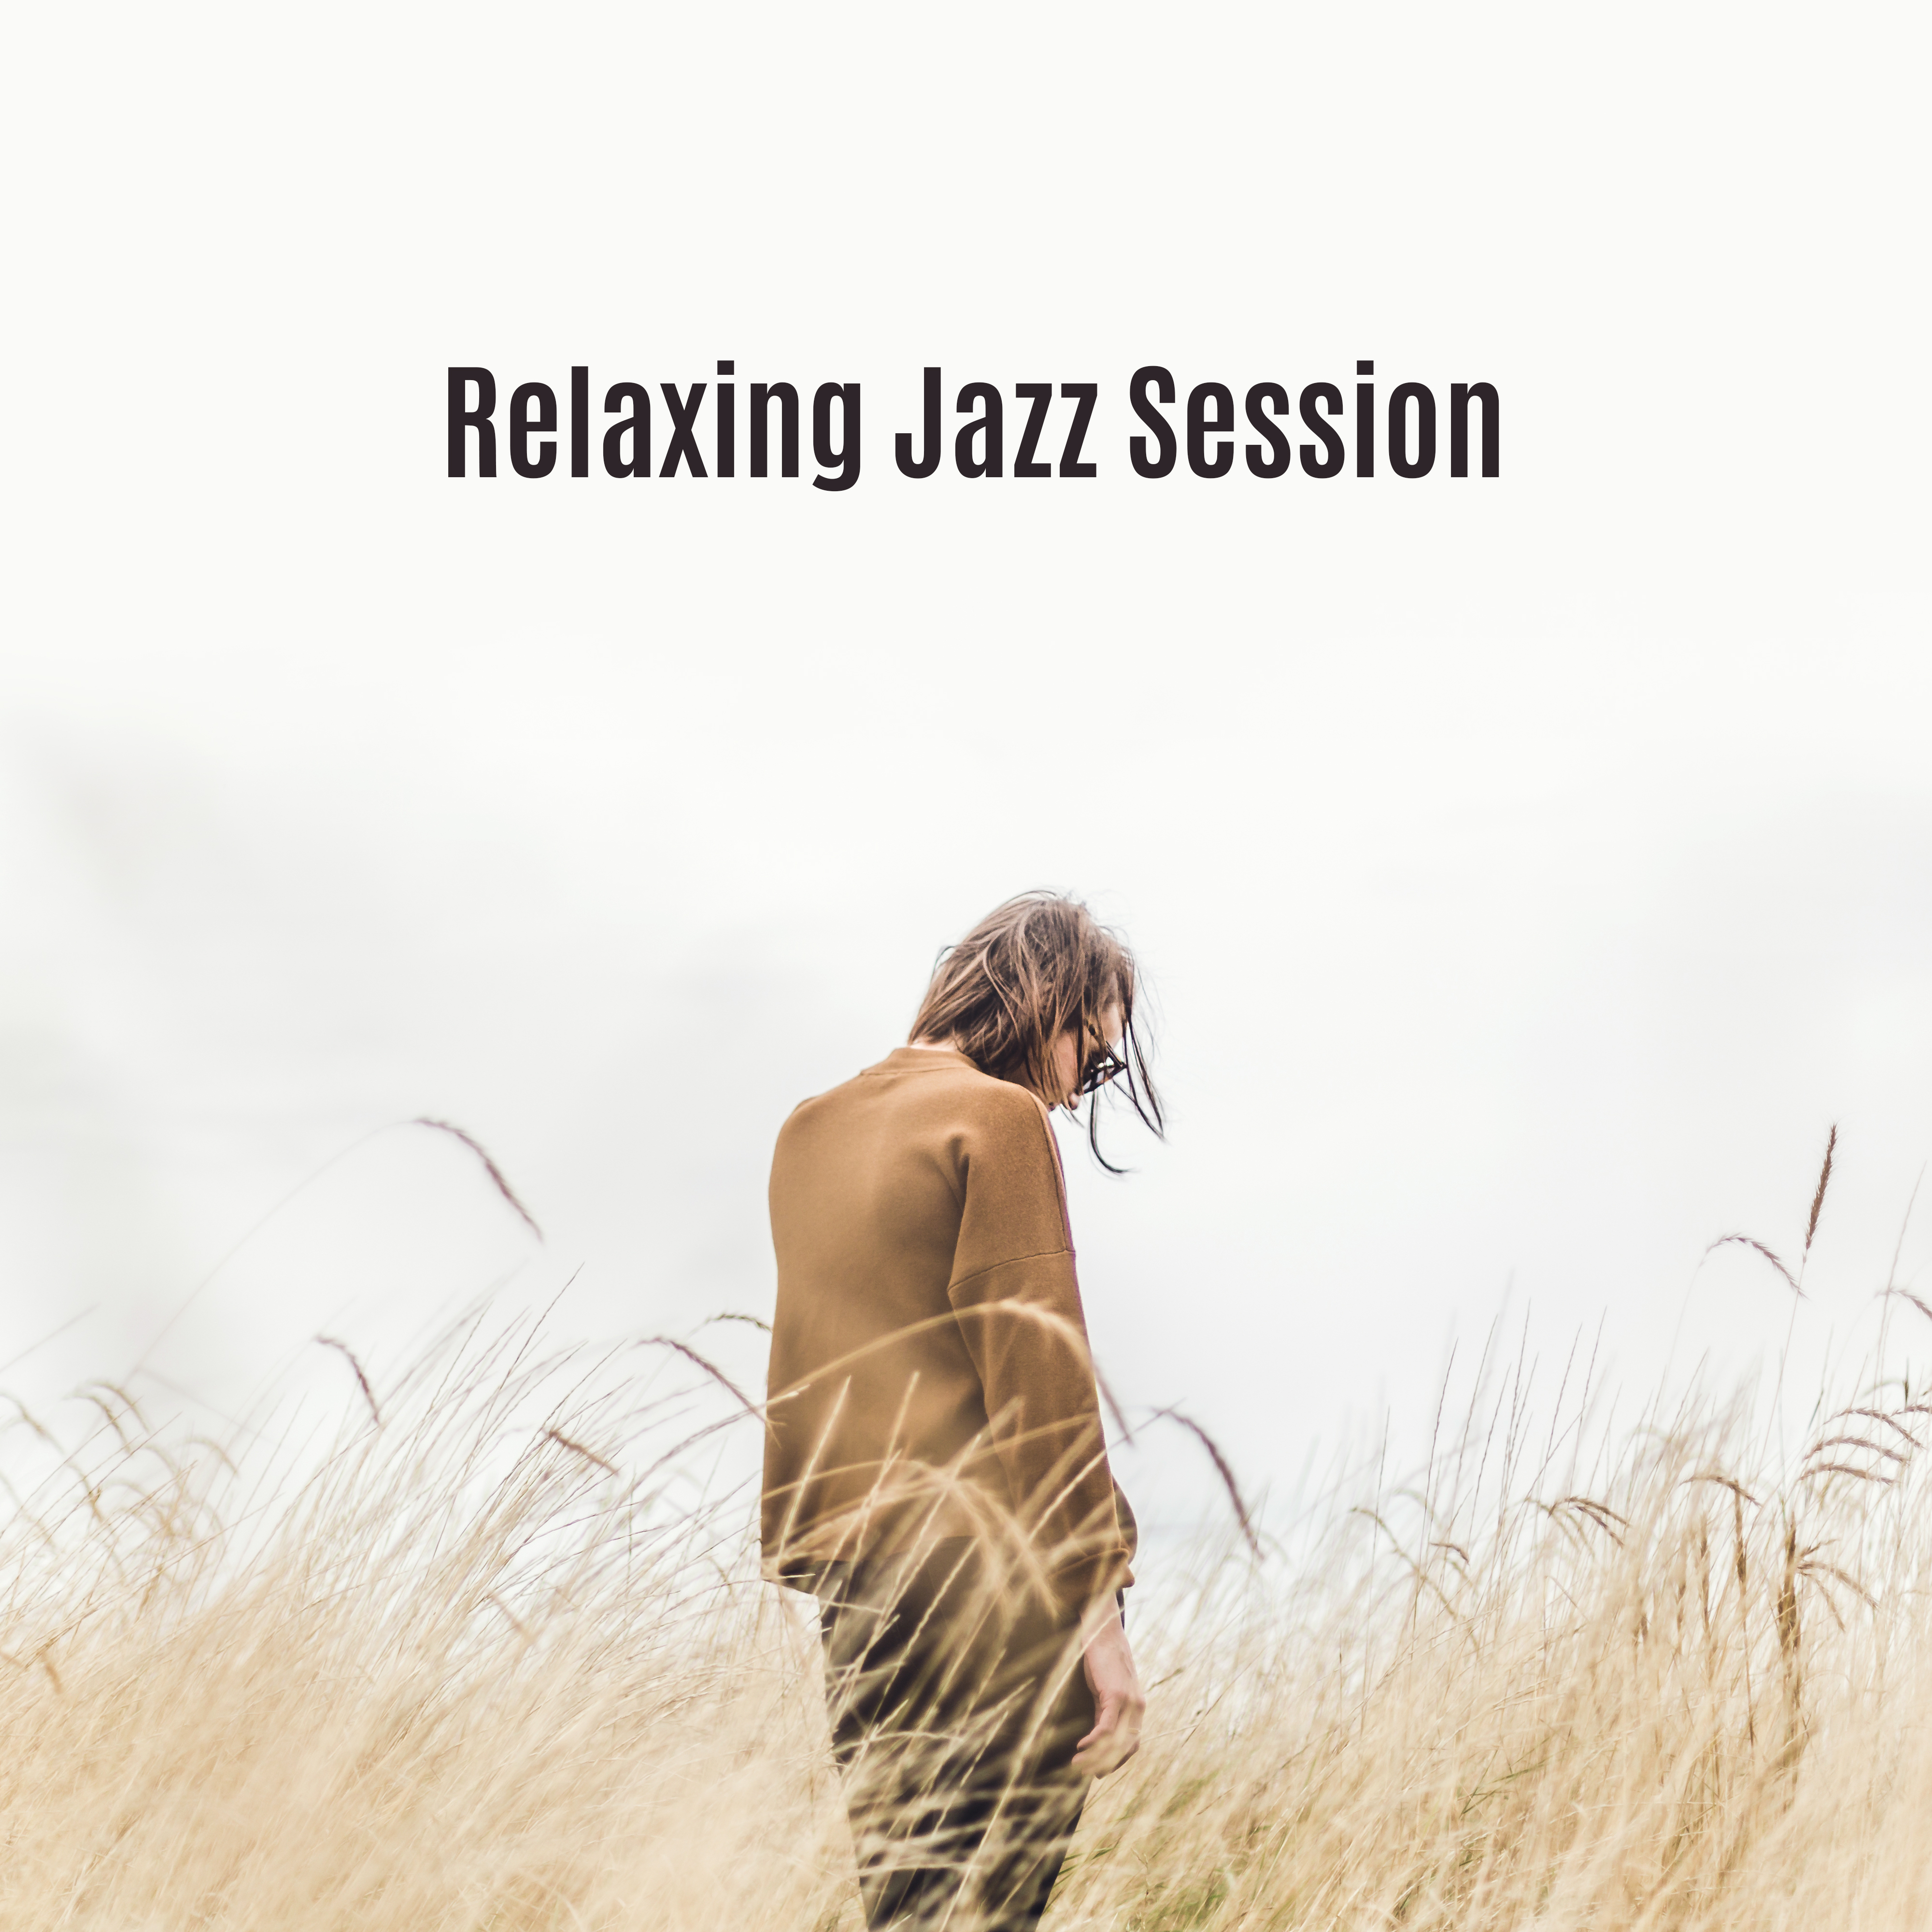 Relaxing Jazz Session  Smooth Piano Jazz, Rest in Restaurant, Coffee Time, Soft Music